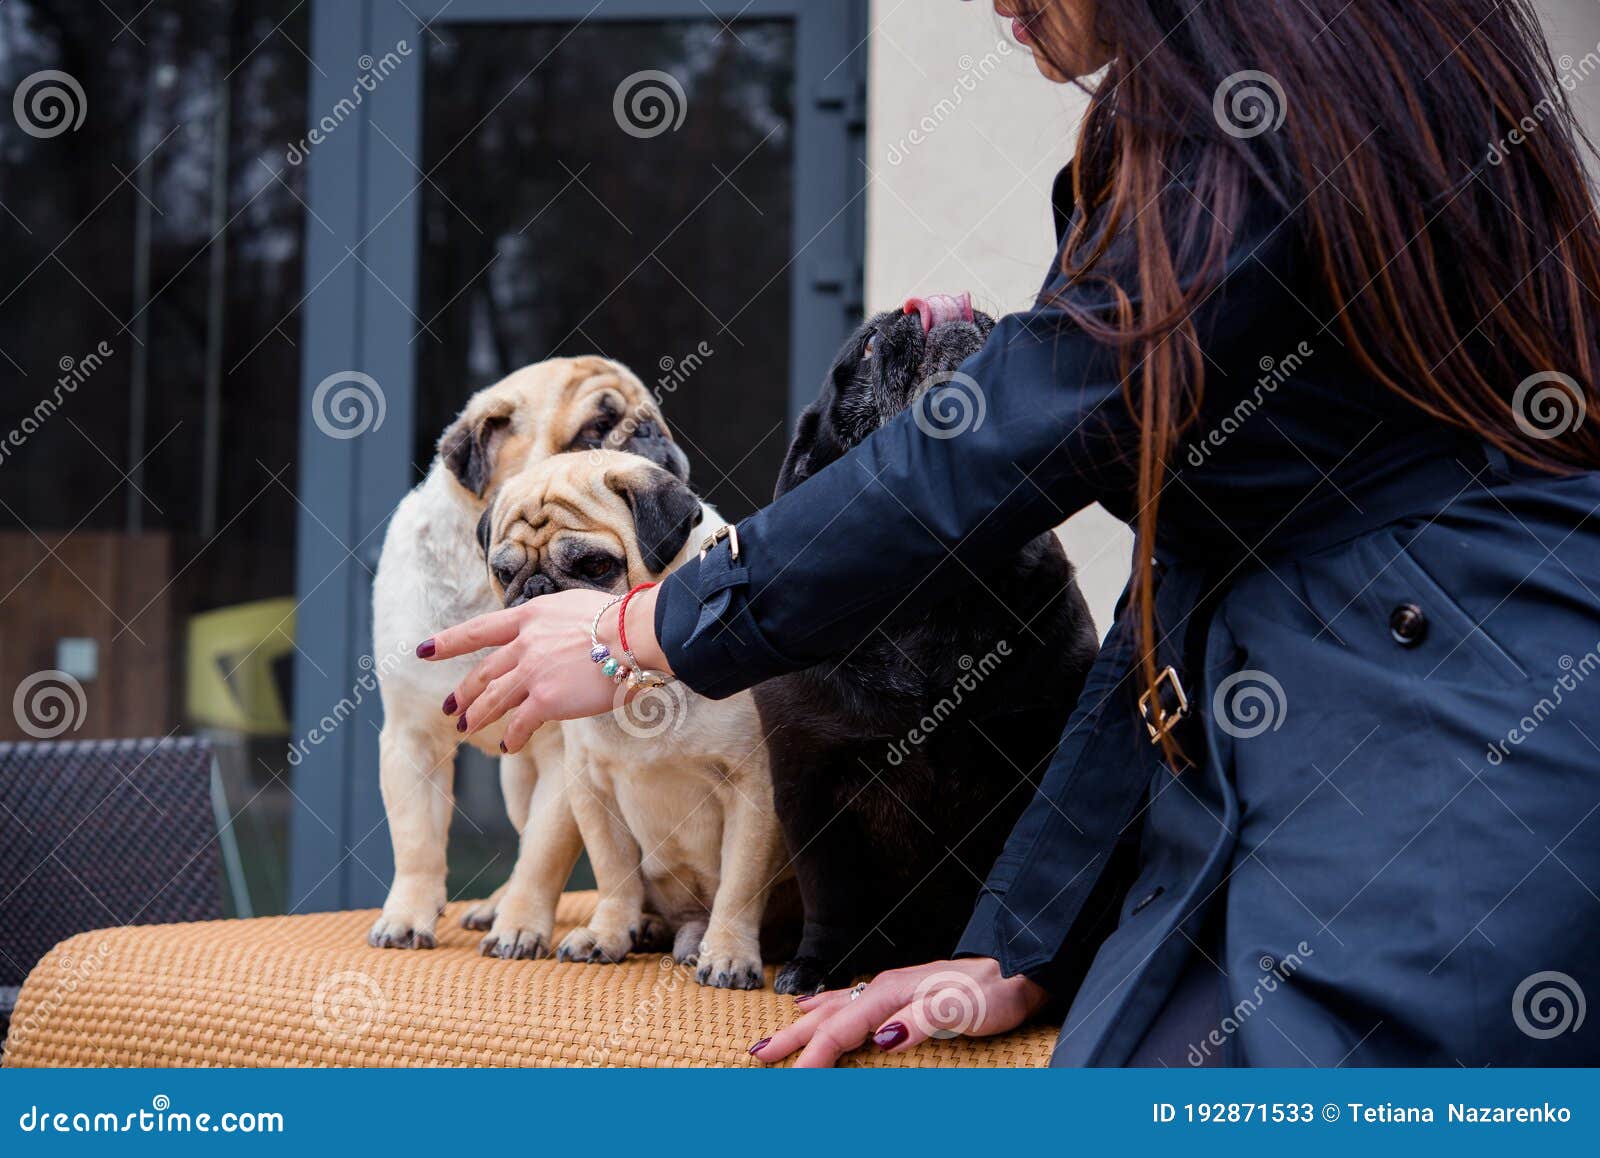 Dogs are Best Human Friends Stock Image - Image of animal, attractive:  192871533